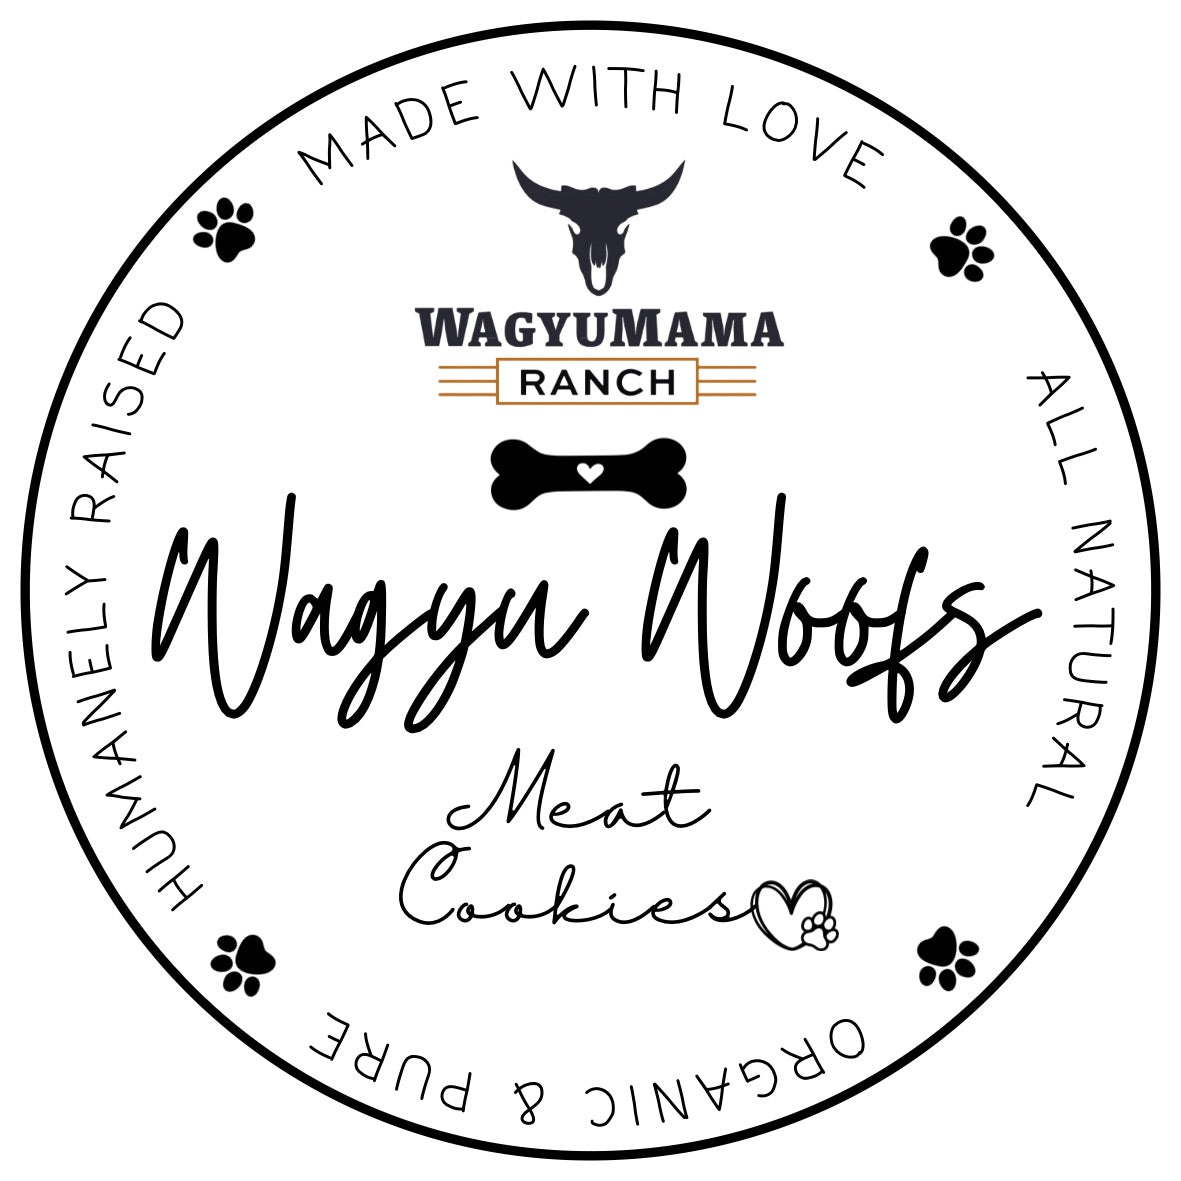 Wagyu Woofs Meat Cookies